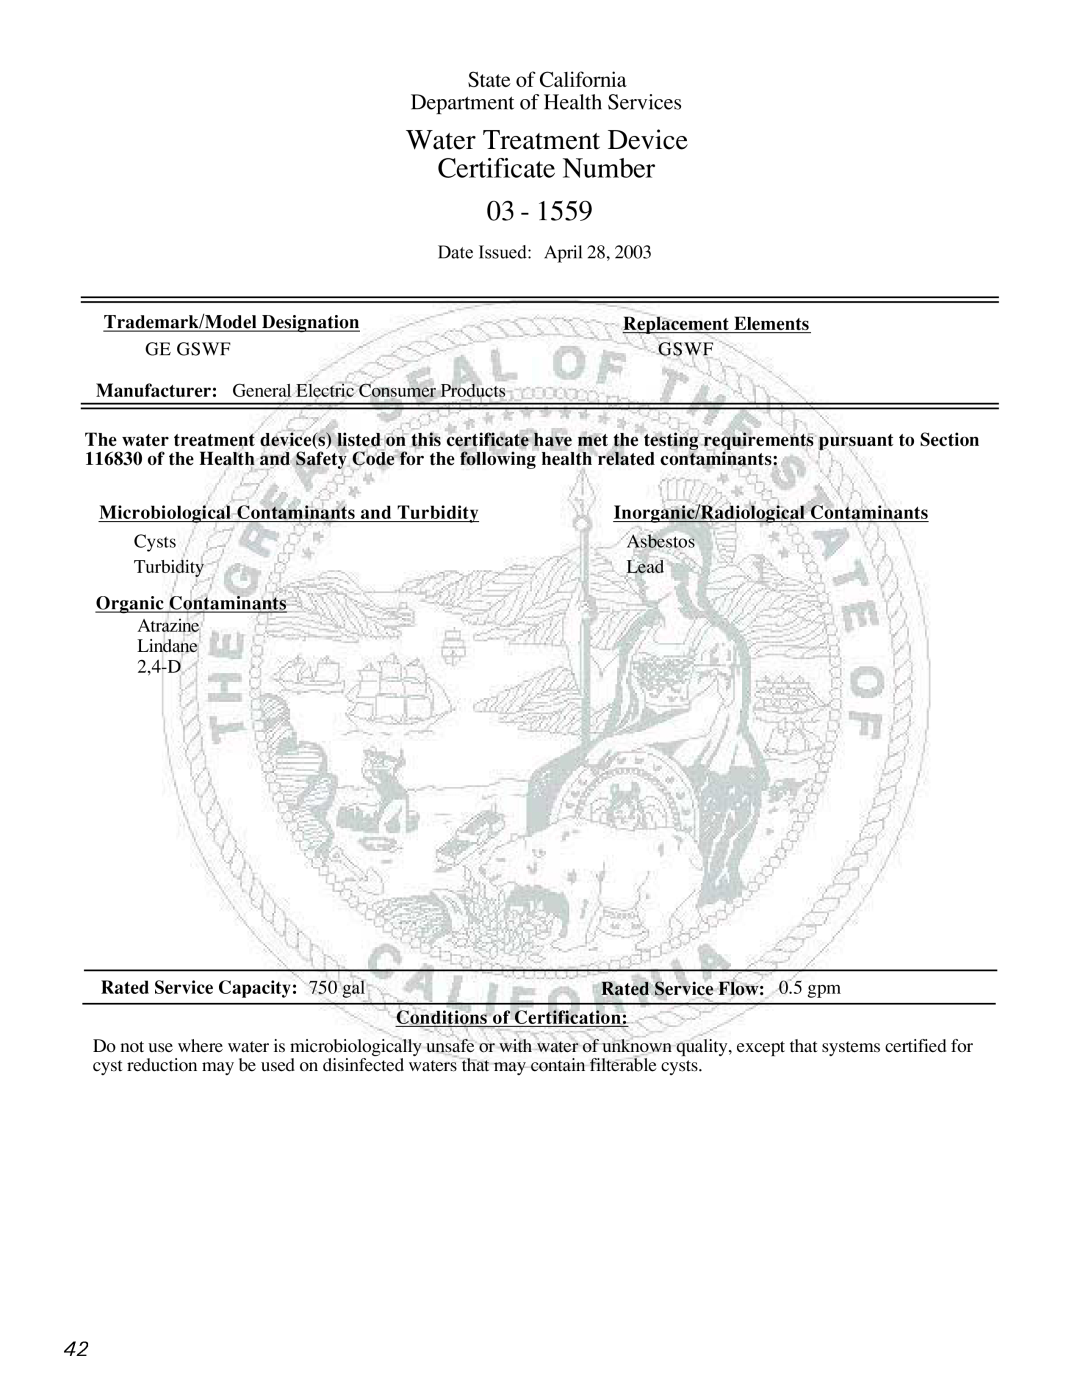 GE 197D4618P003 State of California, Department of Health Services, Water Treatment Device, Certificate Number 